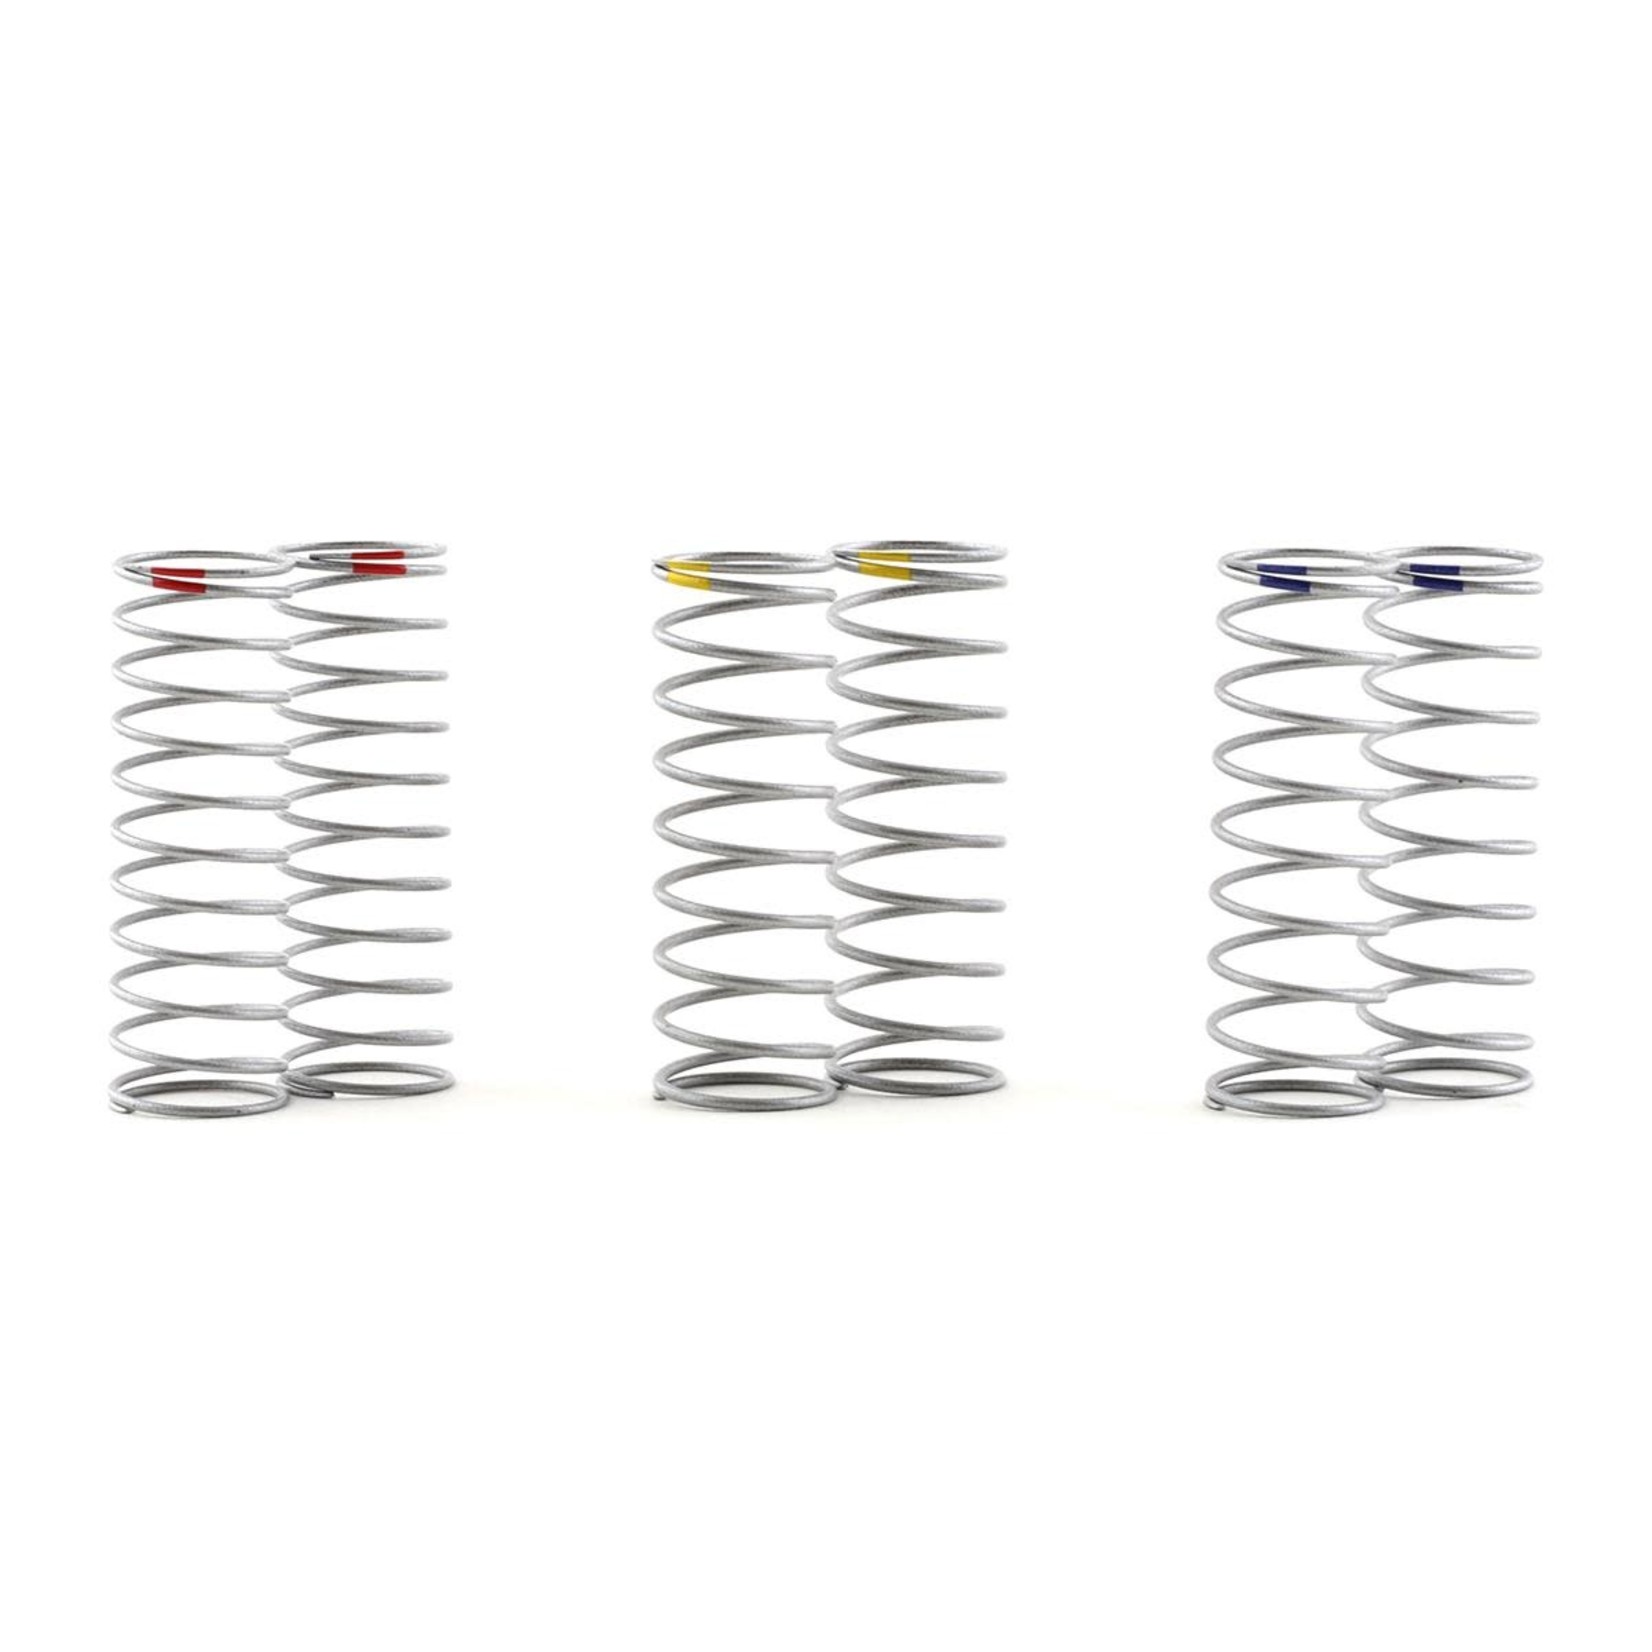 Incision Incision S8E 80mm Shock Spring Tuning Set (6) #IRC00512